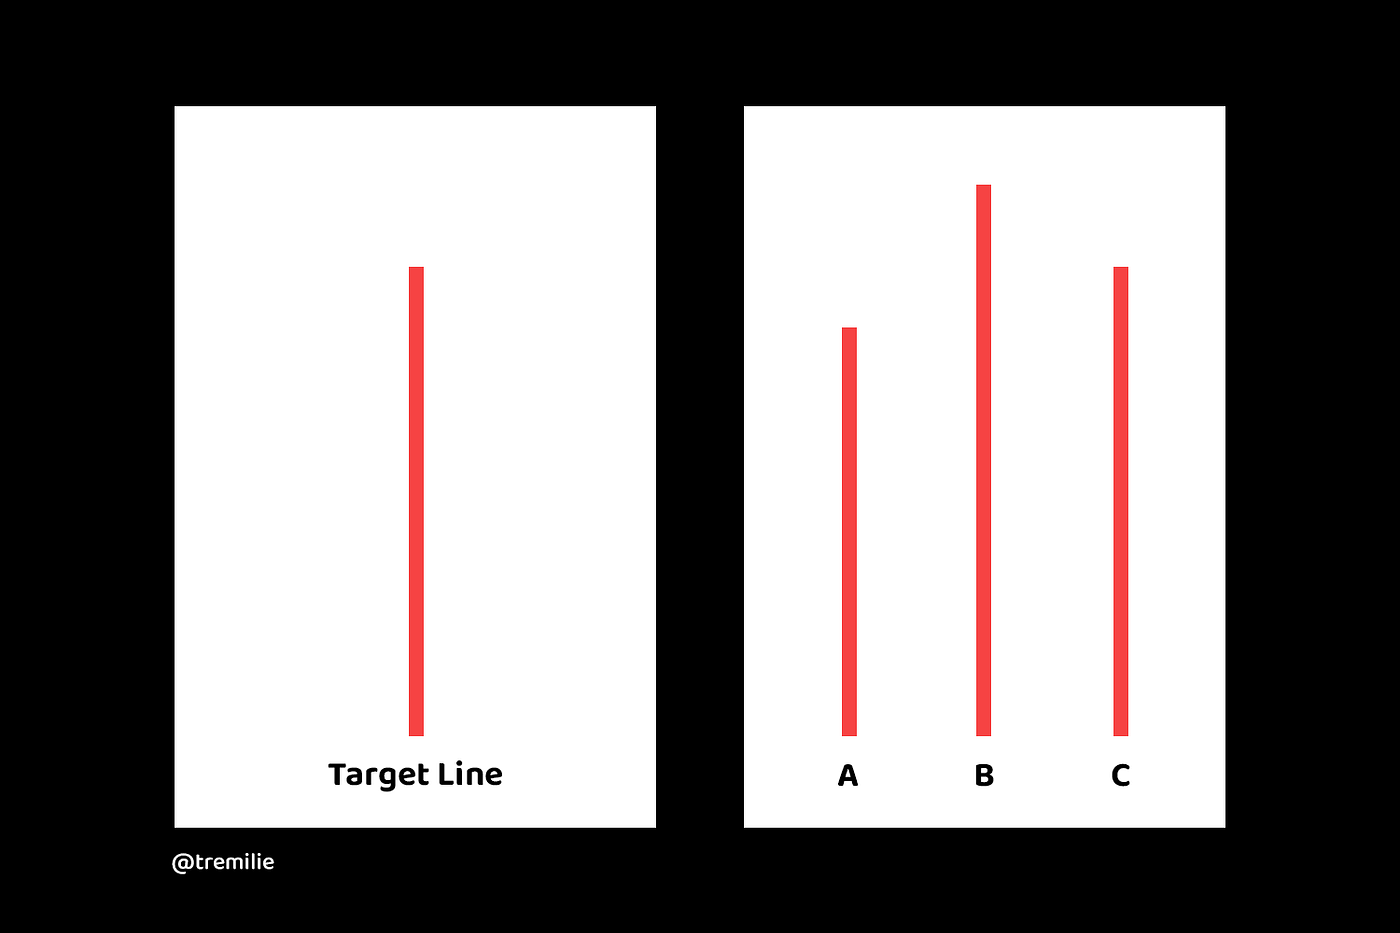 Presentation of the Target Line, and the A, B, and C Lines in order to guess which line is similar to the target line.